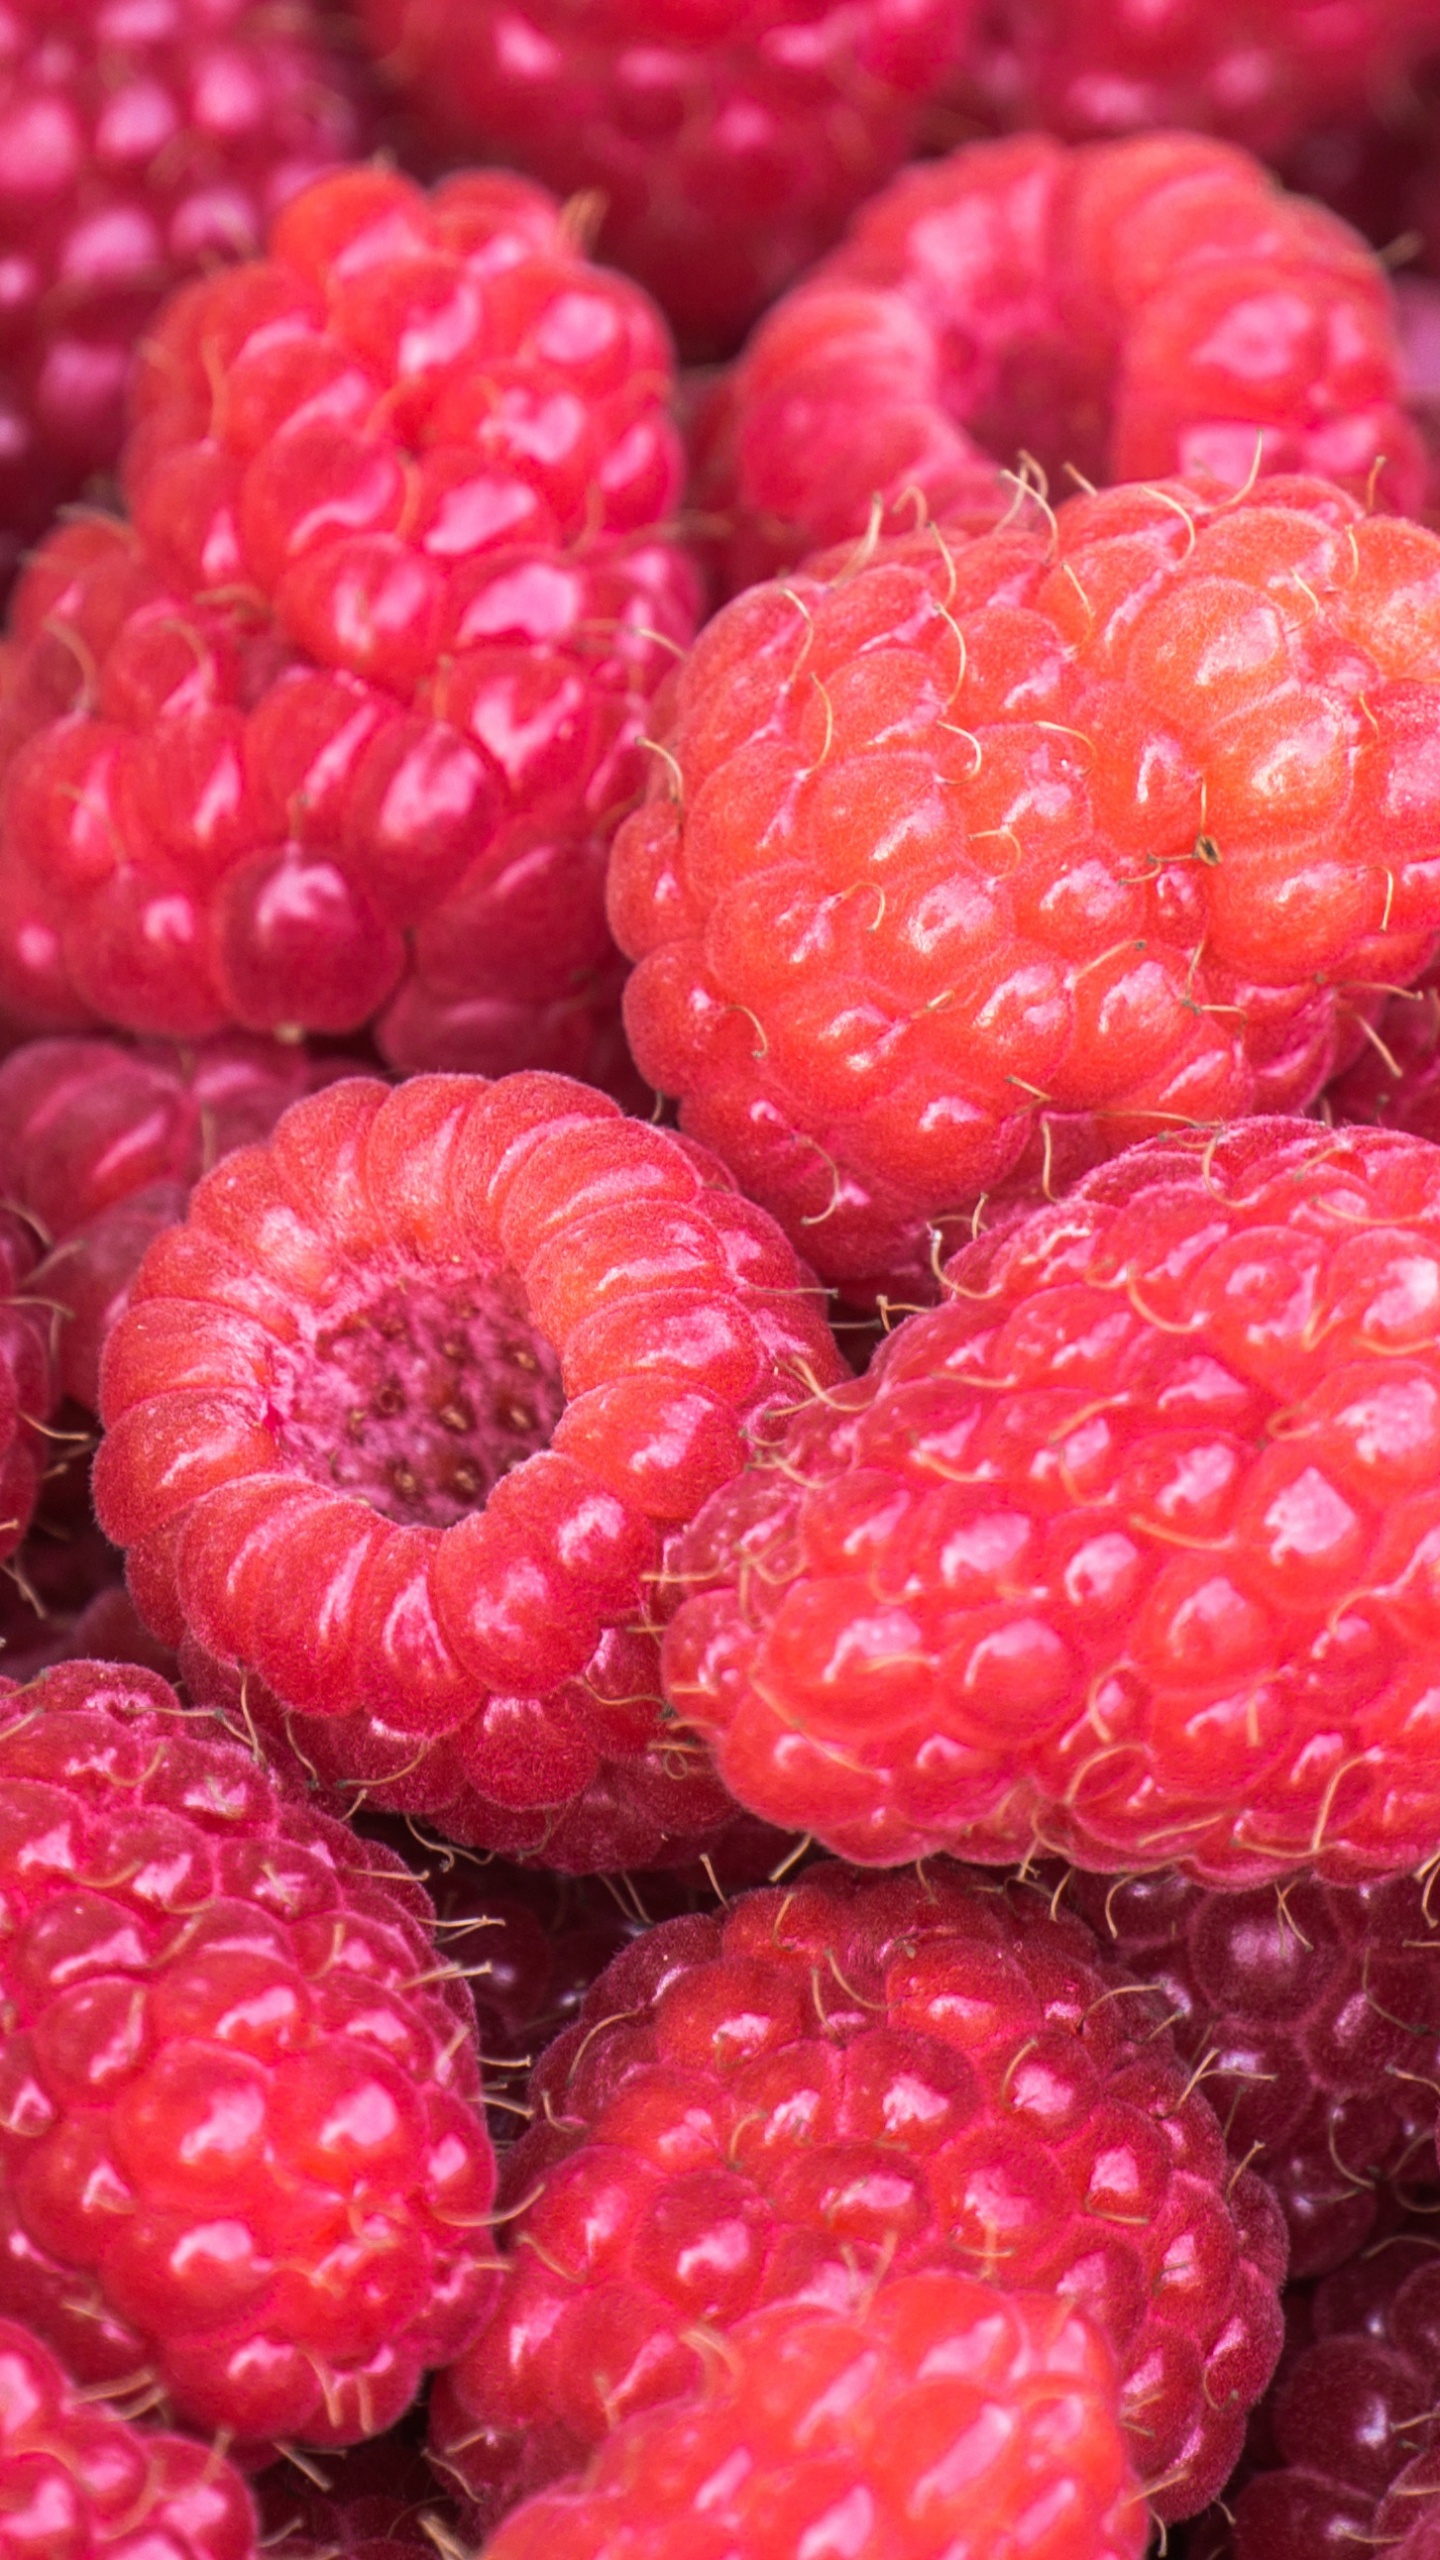 Red Raspberry Fruits in Close up Photography. Wallpaper in 1440x2560 Resolution